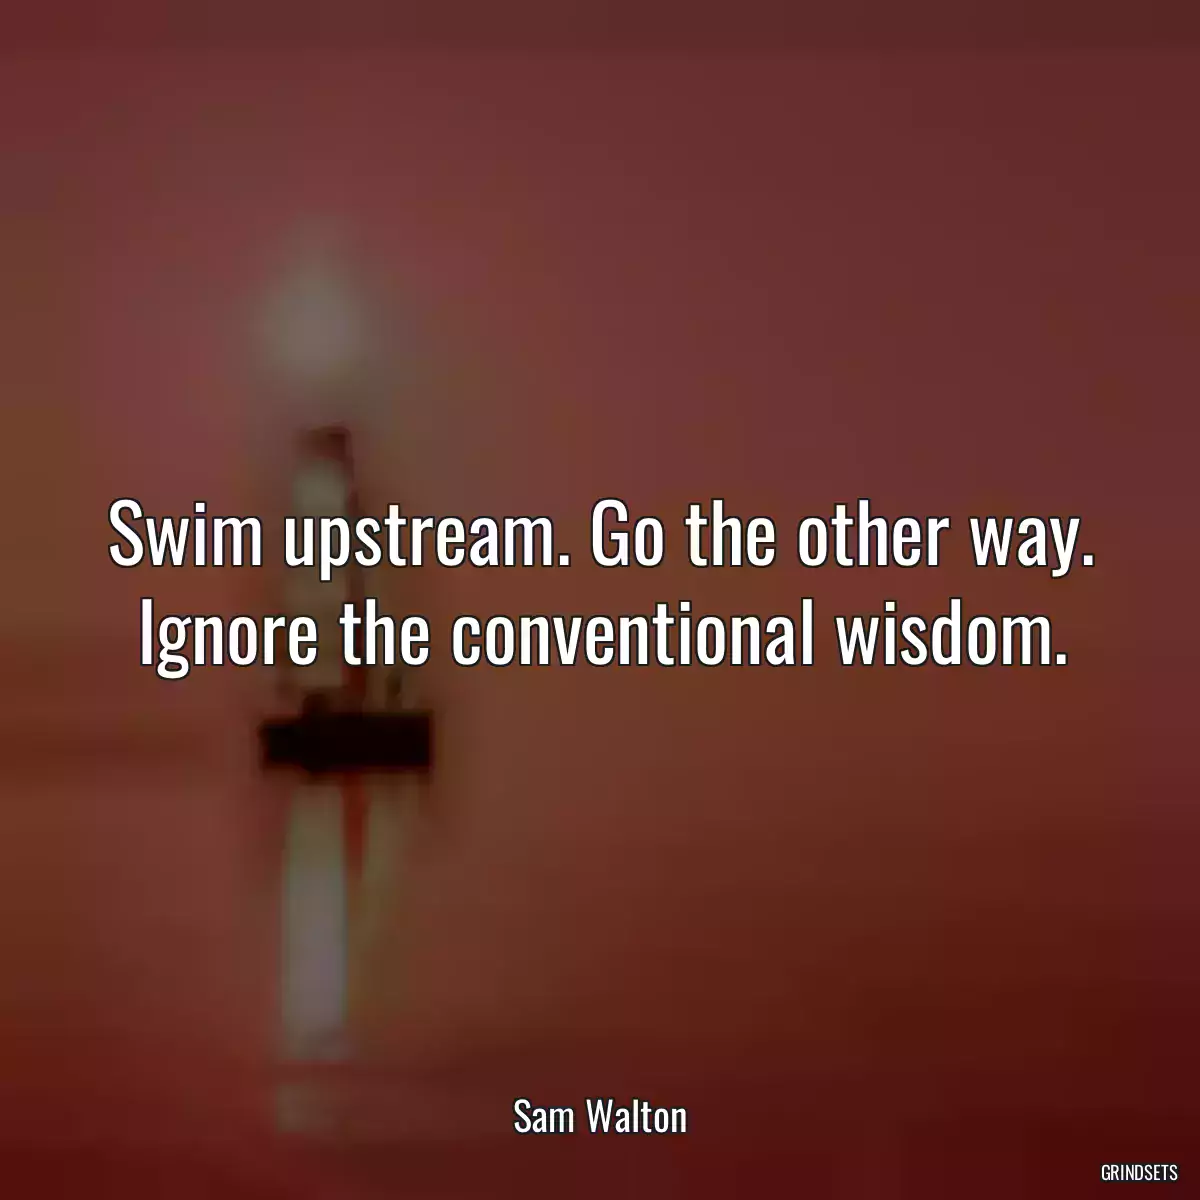 Swim upstream. Go the other way. Ignore the conventional wisdom.